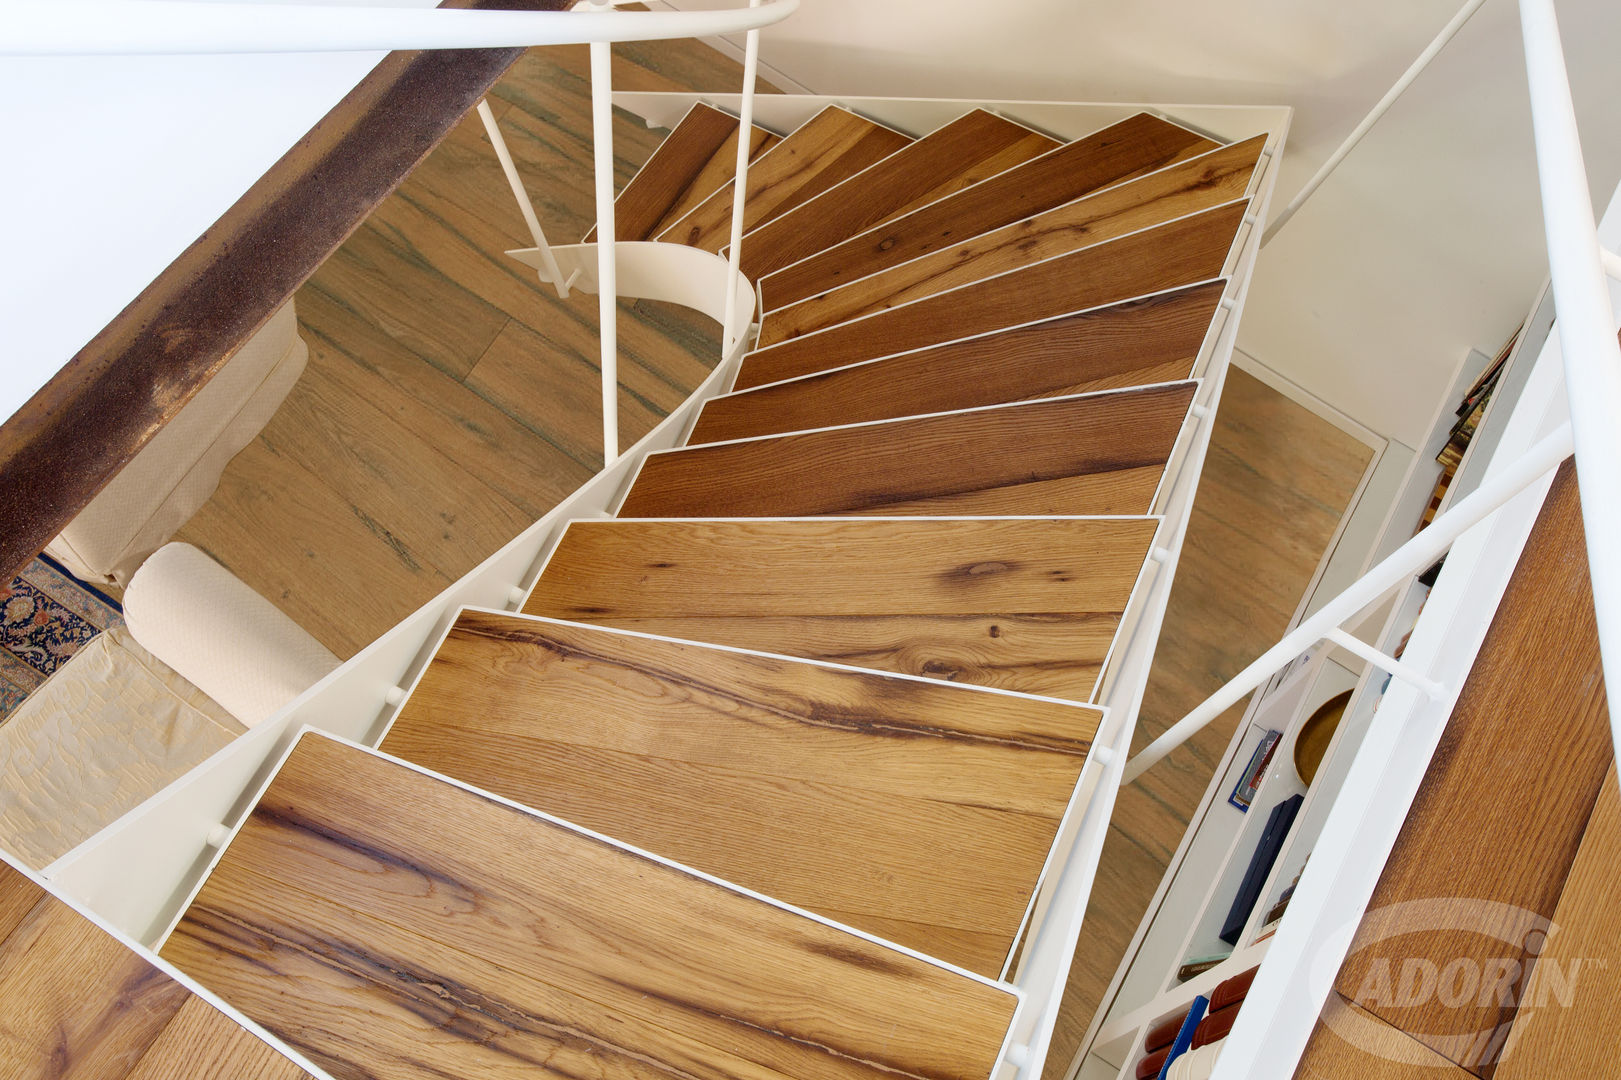 Ideas for combining stairs and parquet, Cadorin Group Srl - Italian craftsmanship production Wood flooring and Coverings Cadorin Group Srl - Italian craftsmanship production Wood flooring and Coverings Merdivenler